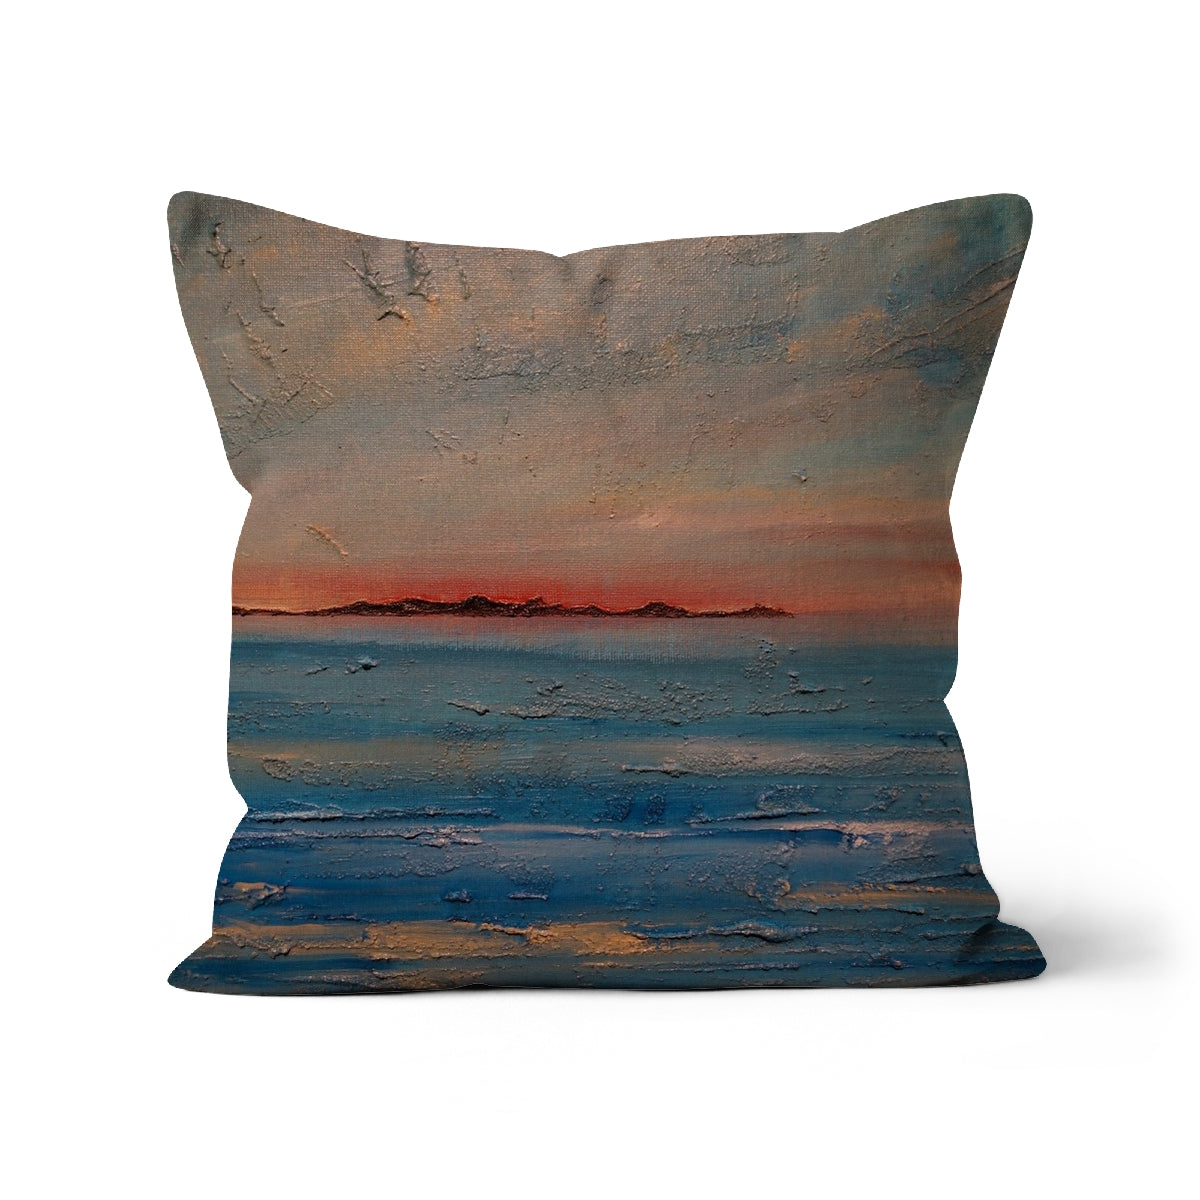 Gigha Sunset Art Gifts Cushion-Cushions-Hebridean Islands Art Gallery-Linen-16"x16"-Paintings, Prints, Homeware, Art Gifts From Scotland By Scottish Artist Kevin Hunter